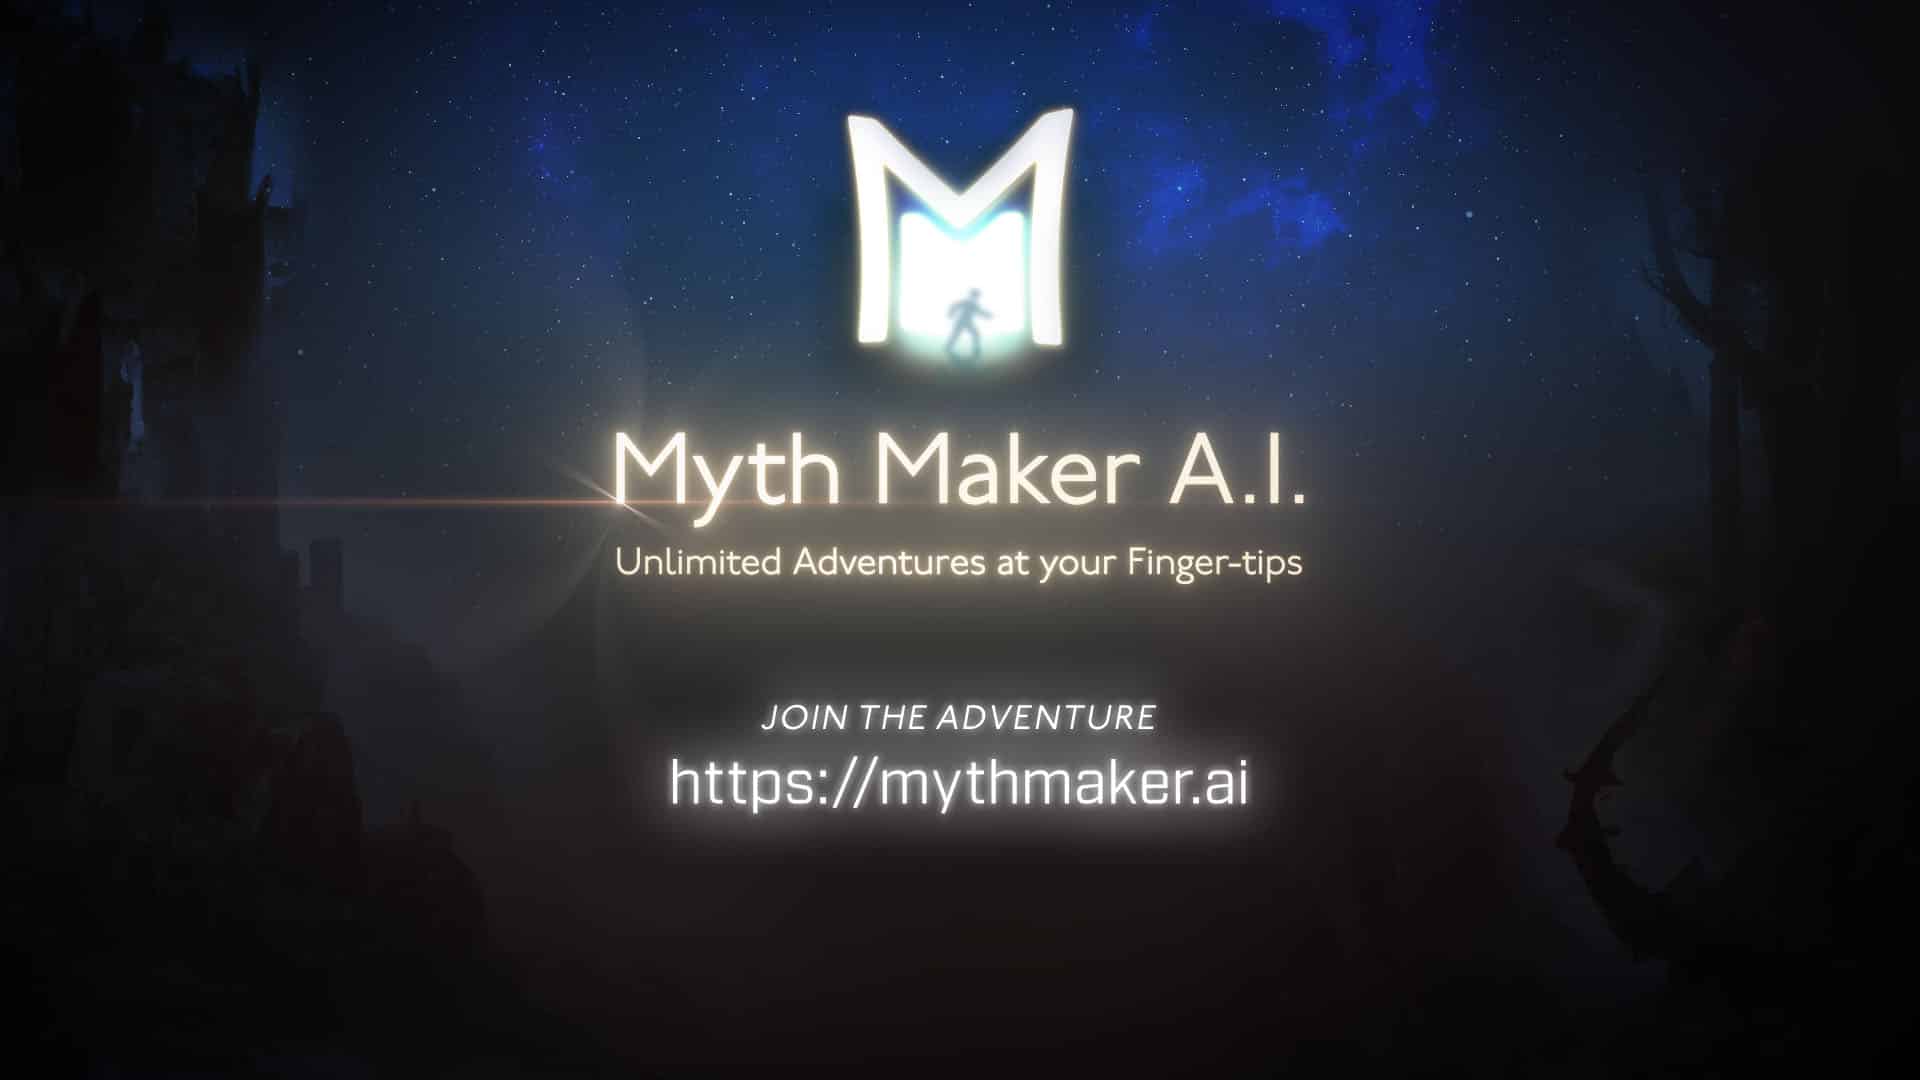 INTRODUCING: Myth Maker A.I. – Infinite Adventures at your Finger-tips